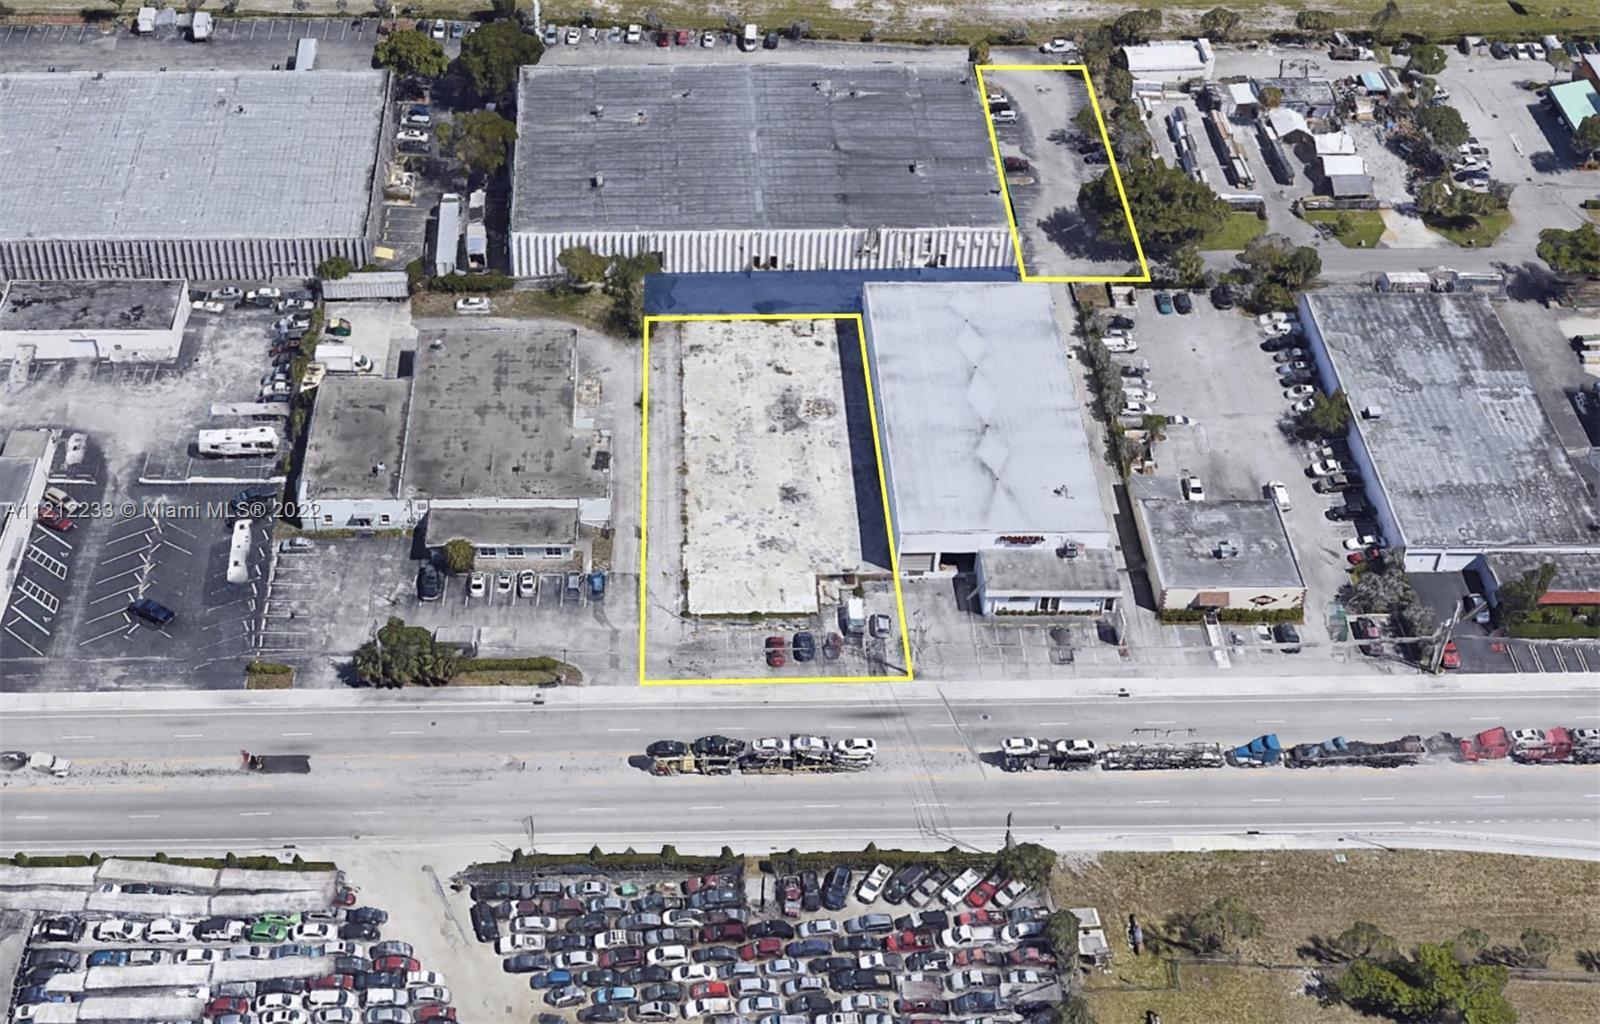 A 24,000+ SF industrial site on N Andrews Ave (SW 12th Ave) in Pompano Beach, FL. The property is zo